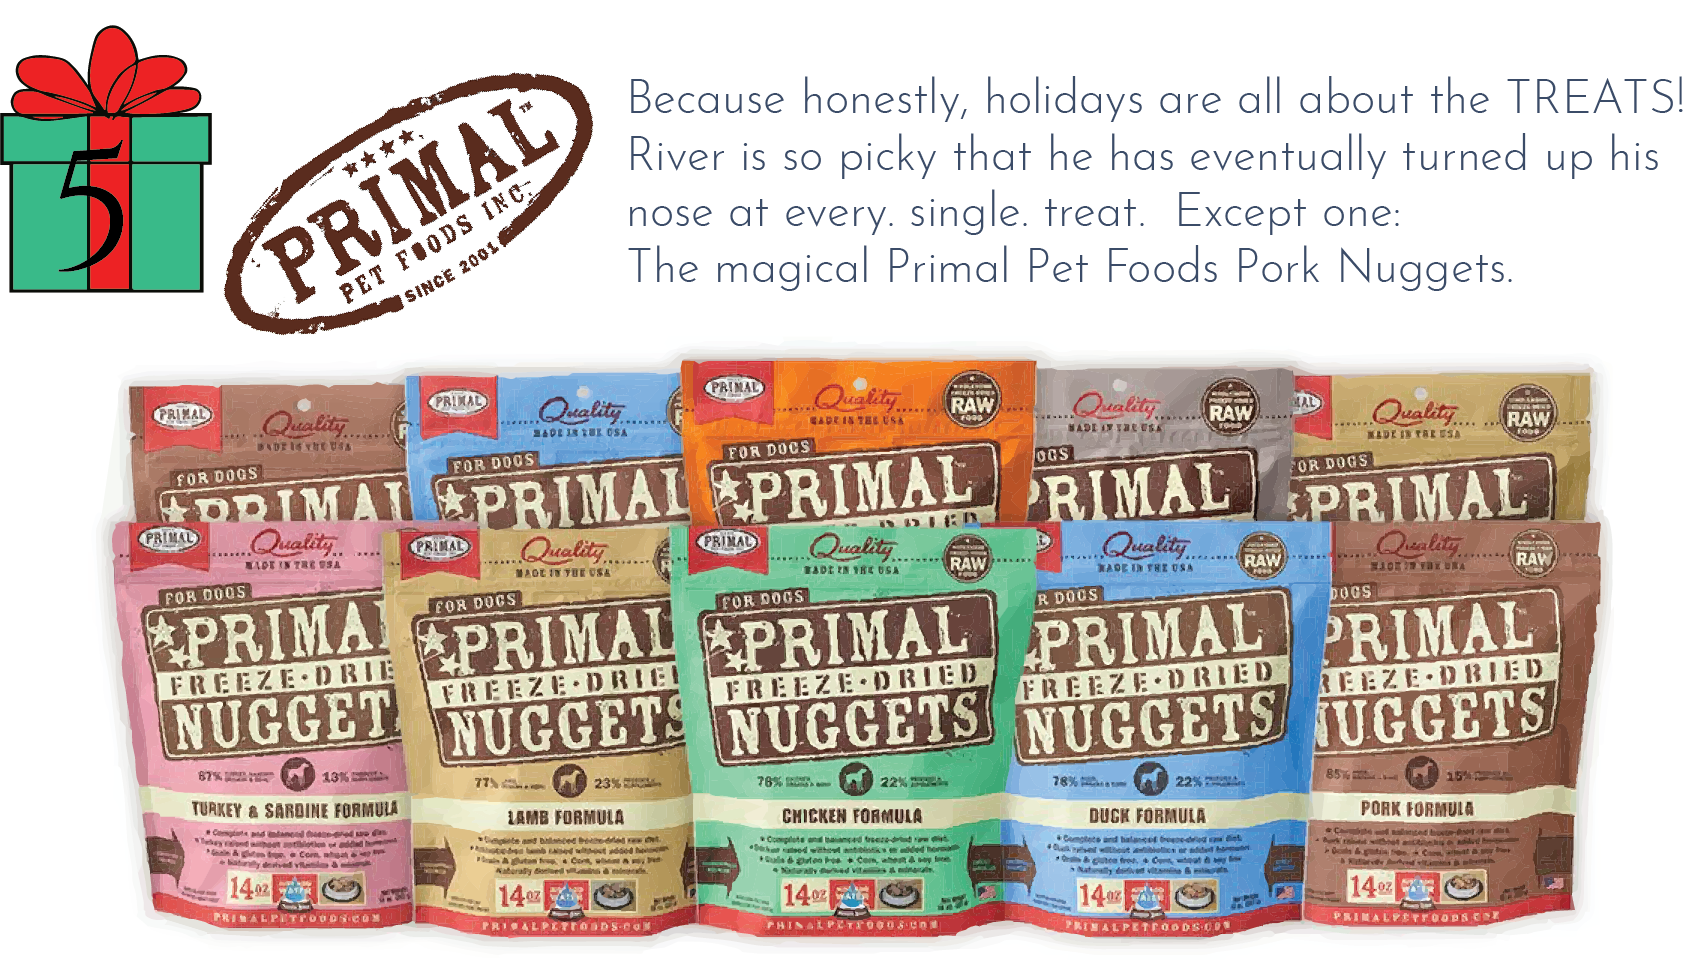 Primal Pet Food - Whyld River top 5 holiday gifts for dog lovers